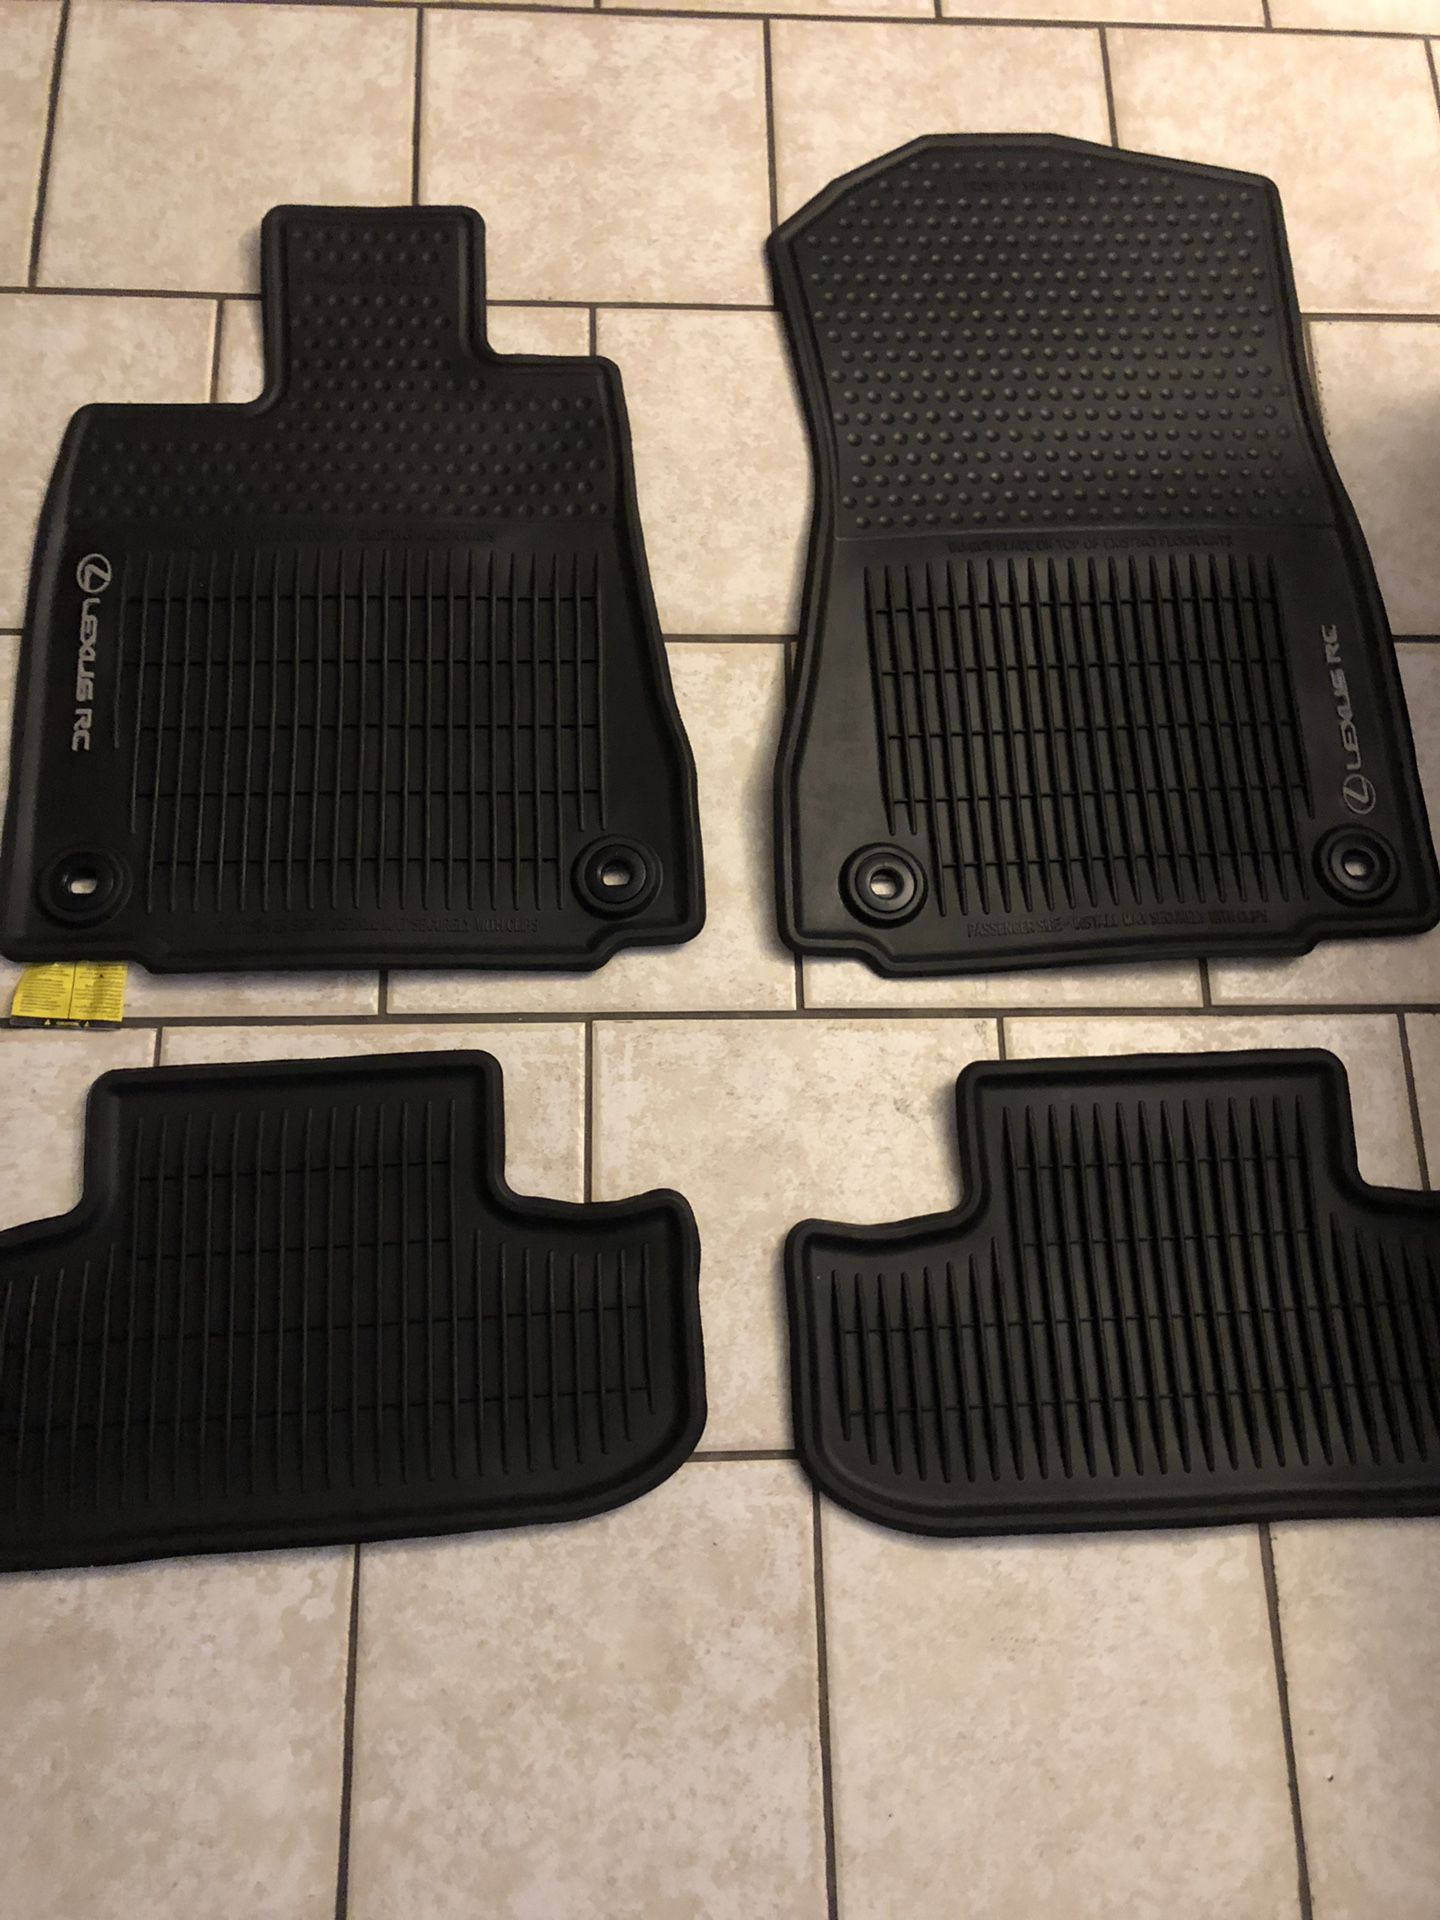 LEXUS RC 350 COUPE BLACK RUBBER ALL WEATHER FLOOR MATS,FITS 2015-2018